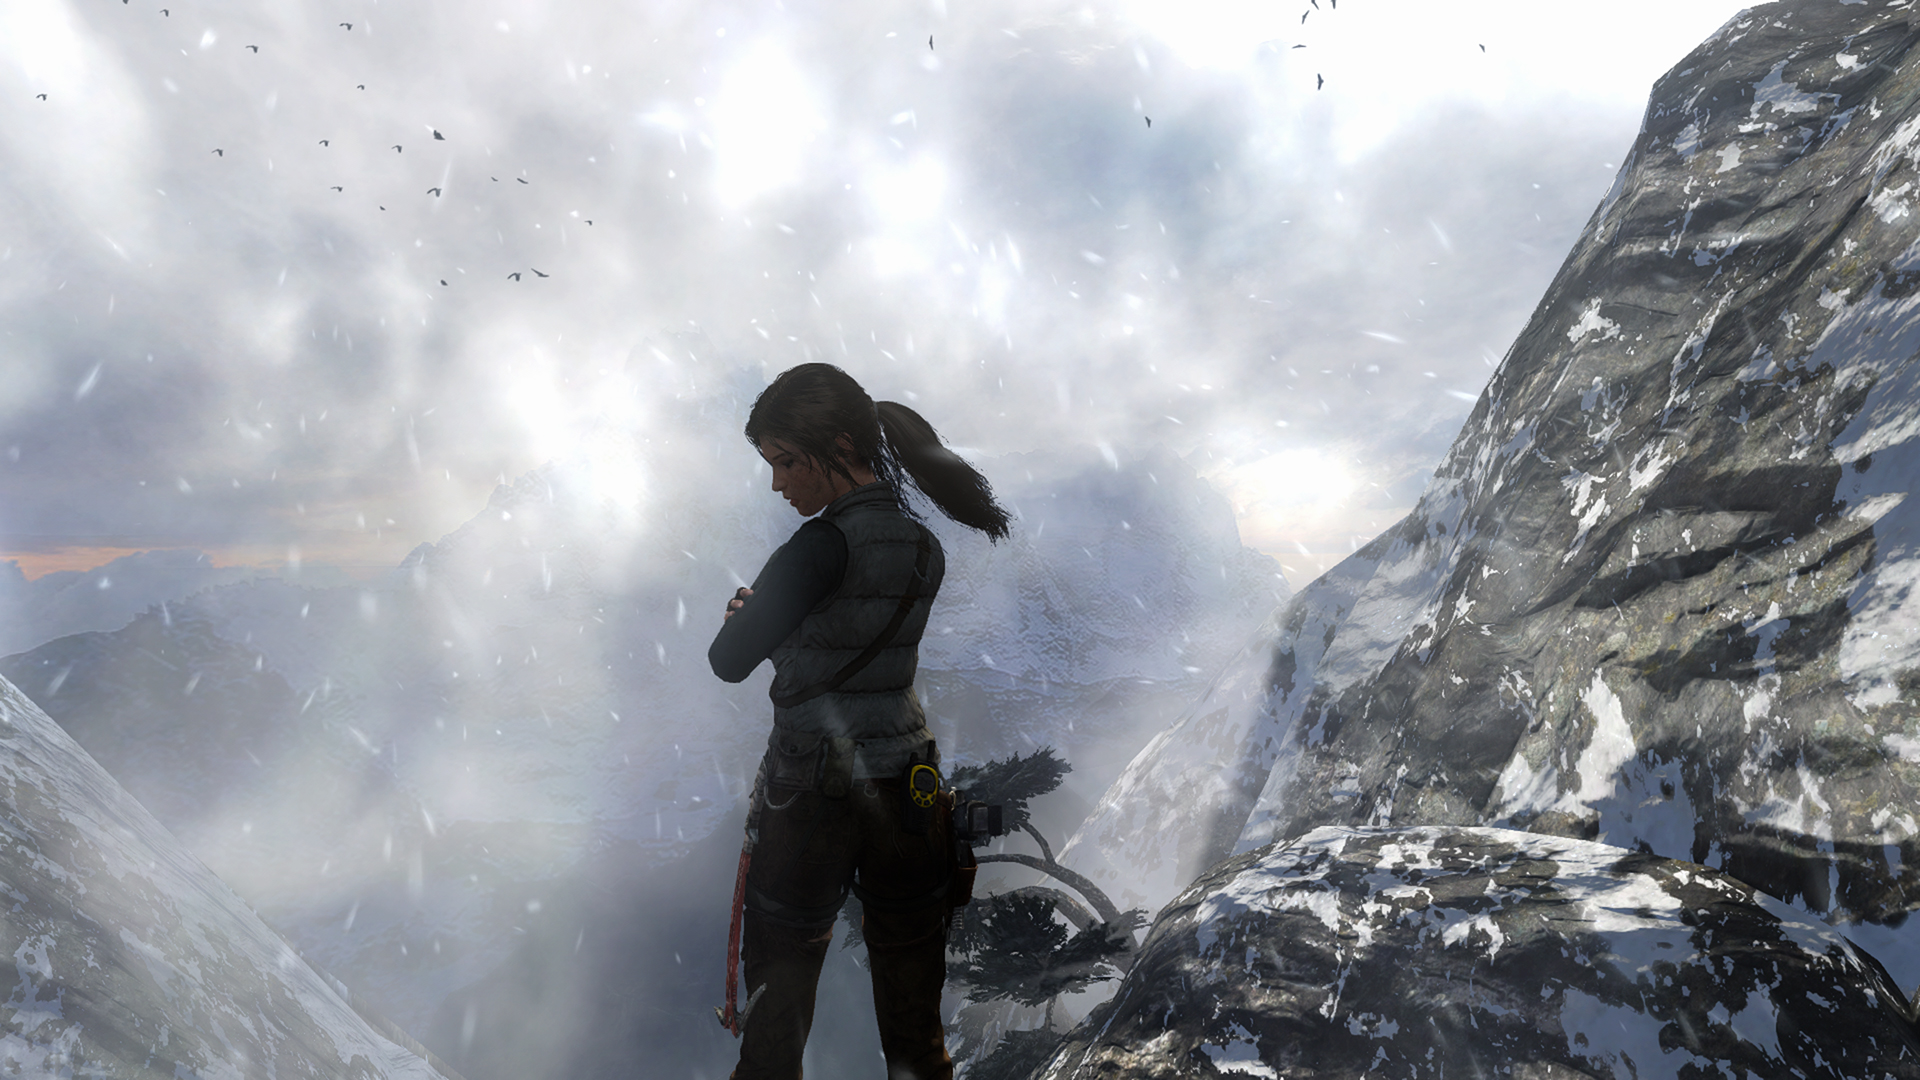 Lara Croft suffering from the cold.